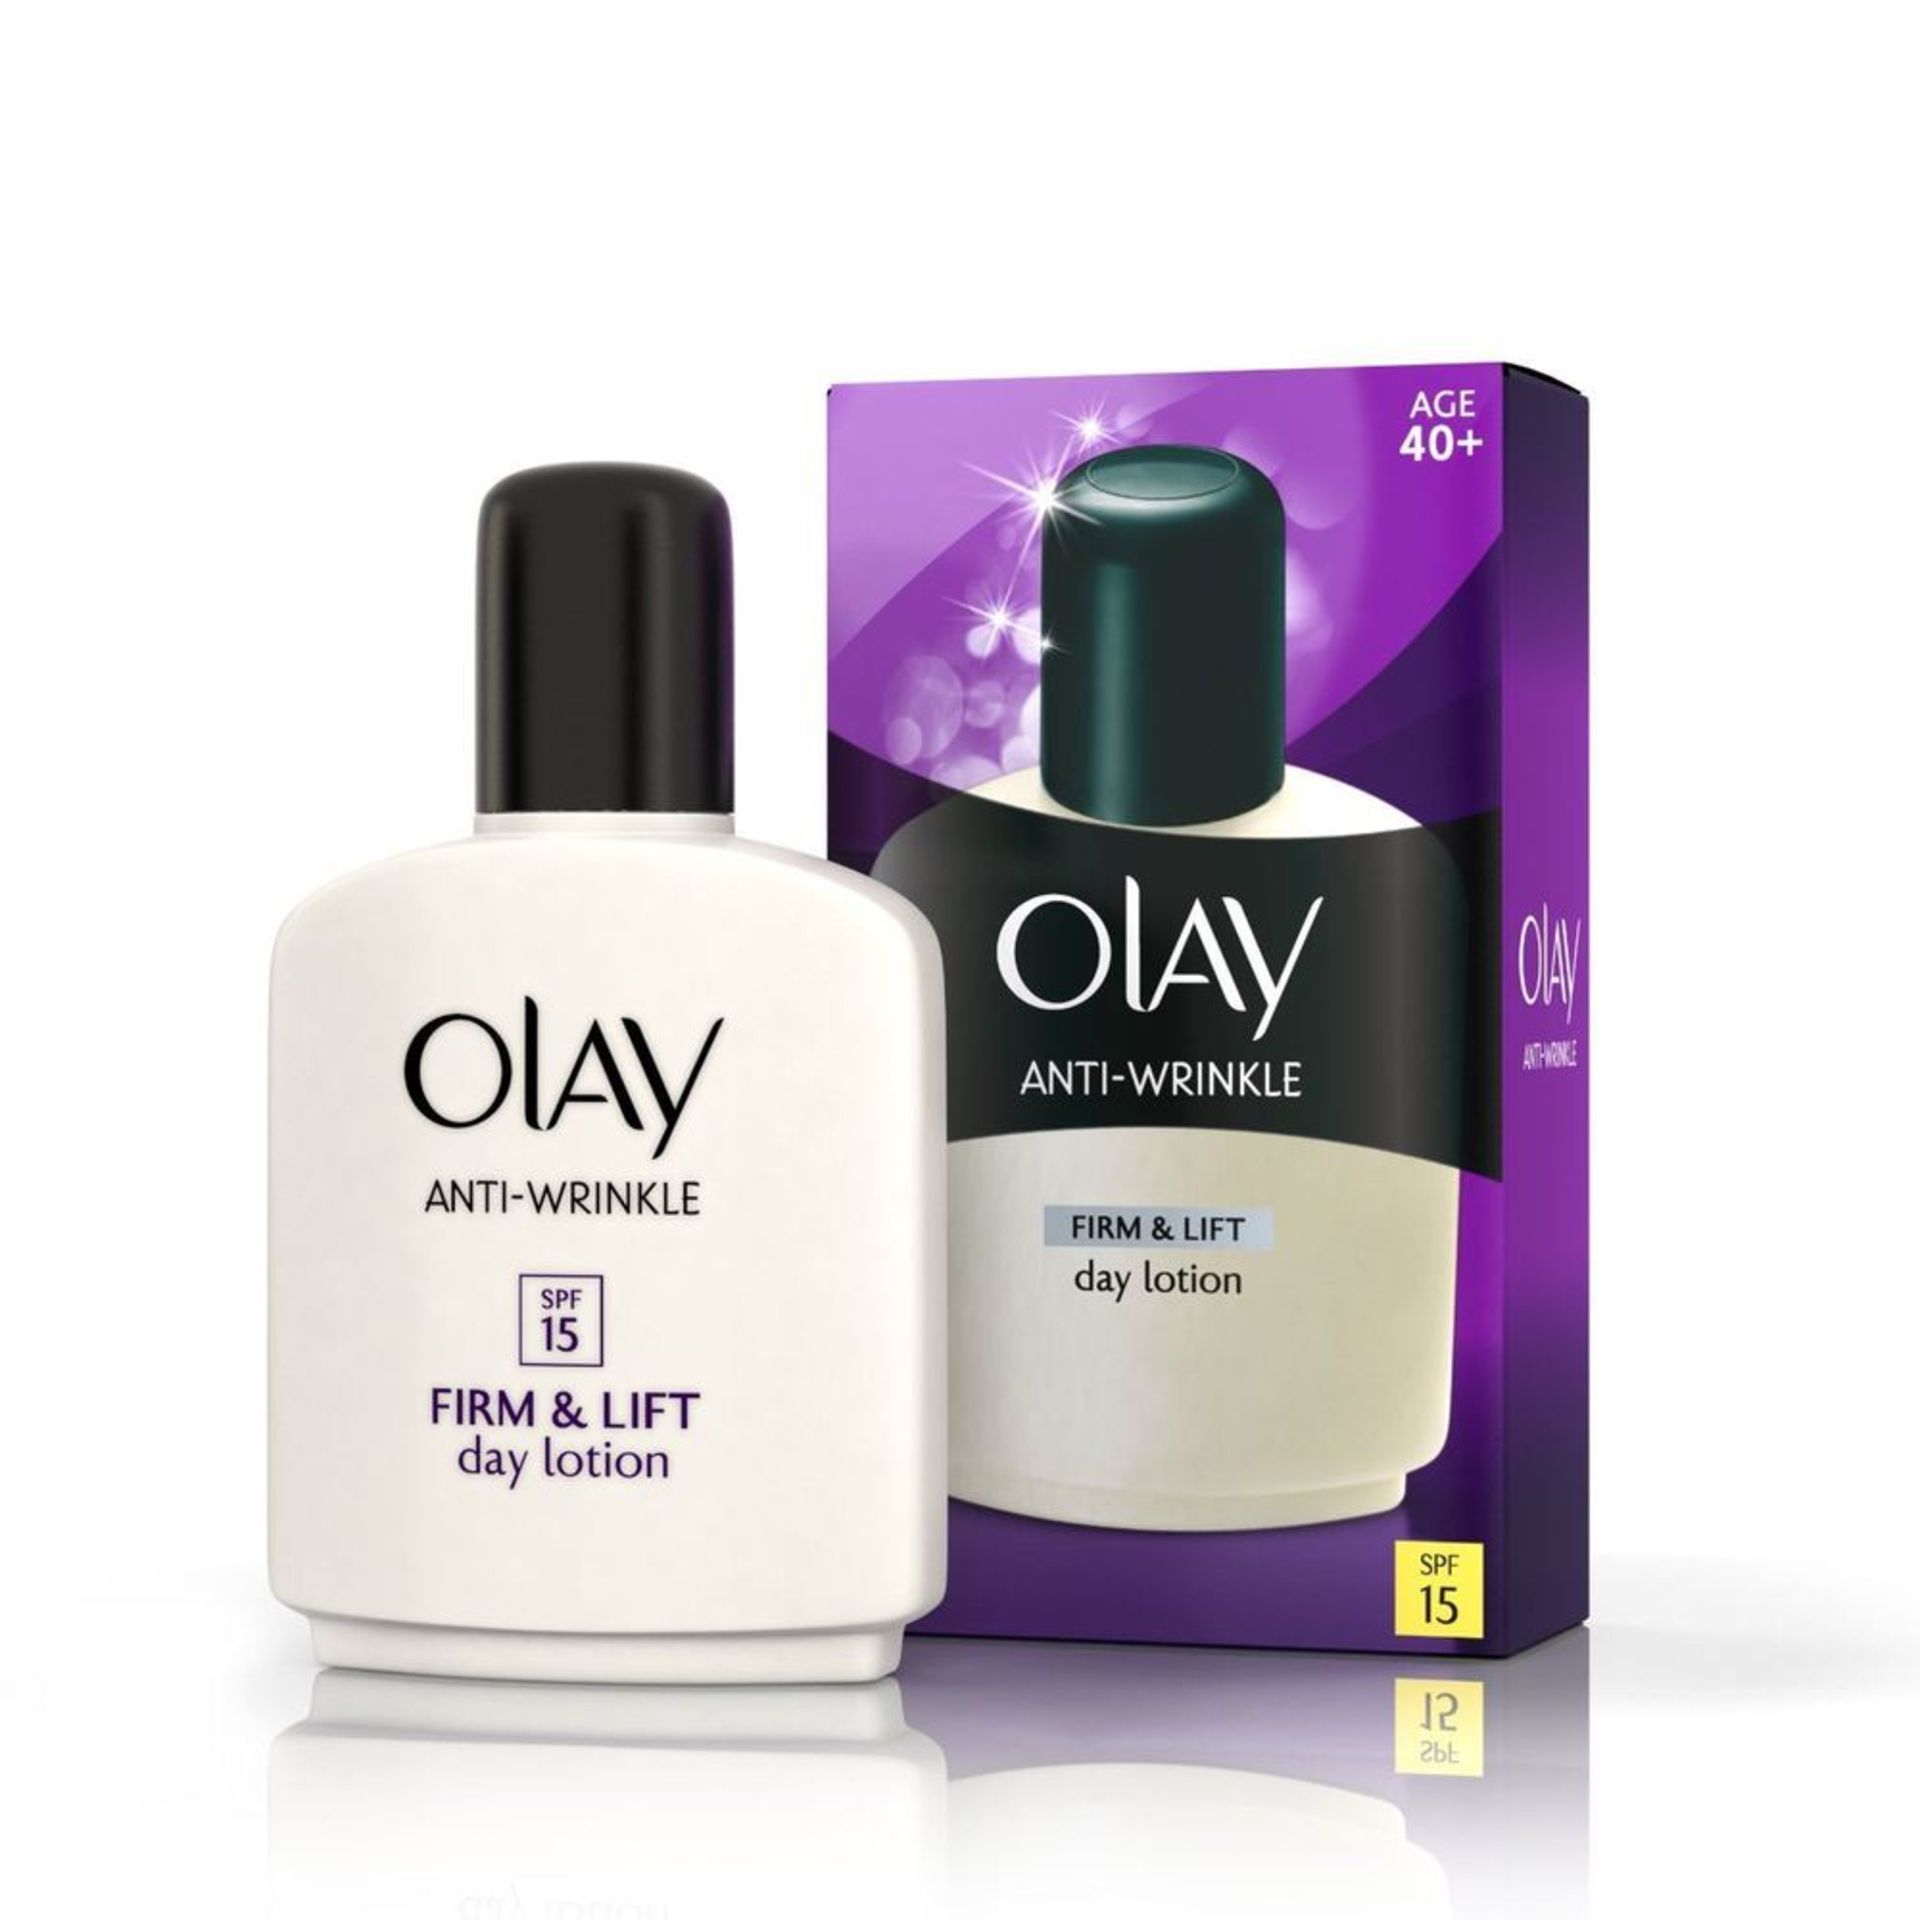 V *TRADE QTY* Brand New Olay Anti-Wrinkle Firm & Lift Day Lotion 100 ml/SPF15/40+ X 3 YOUR BID PRICE